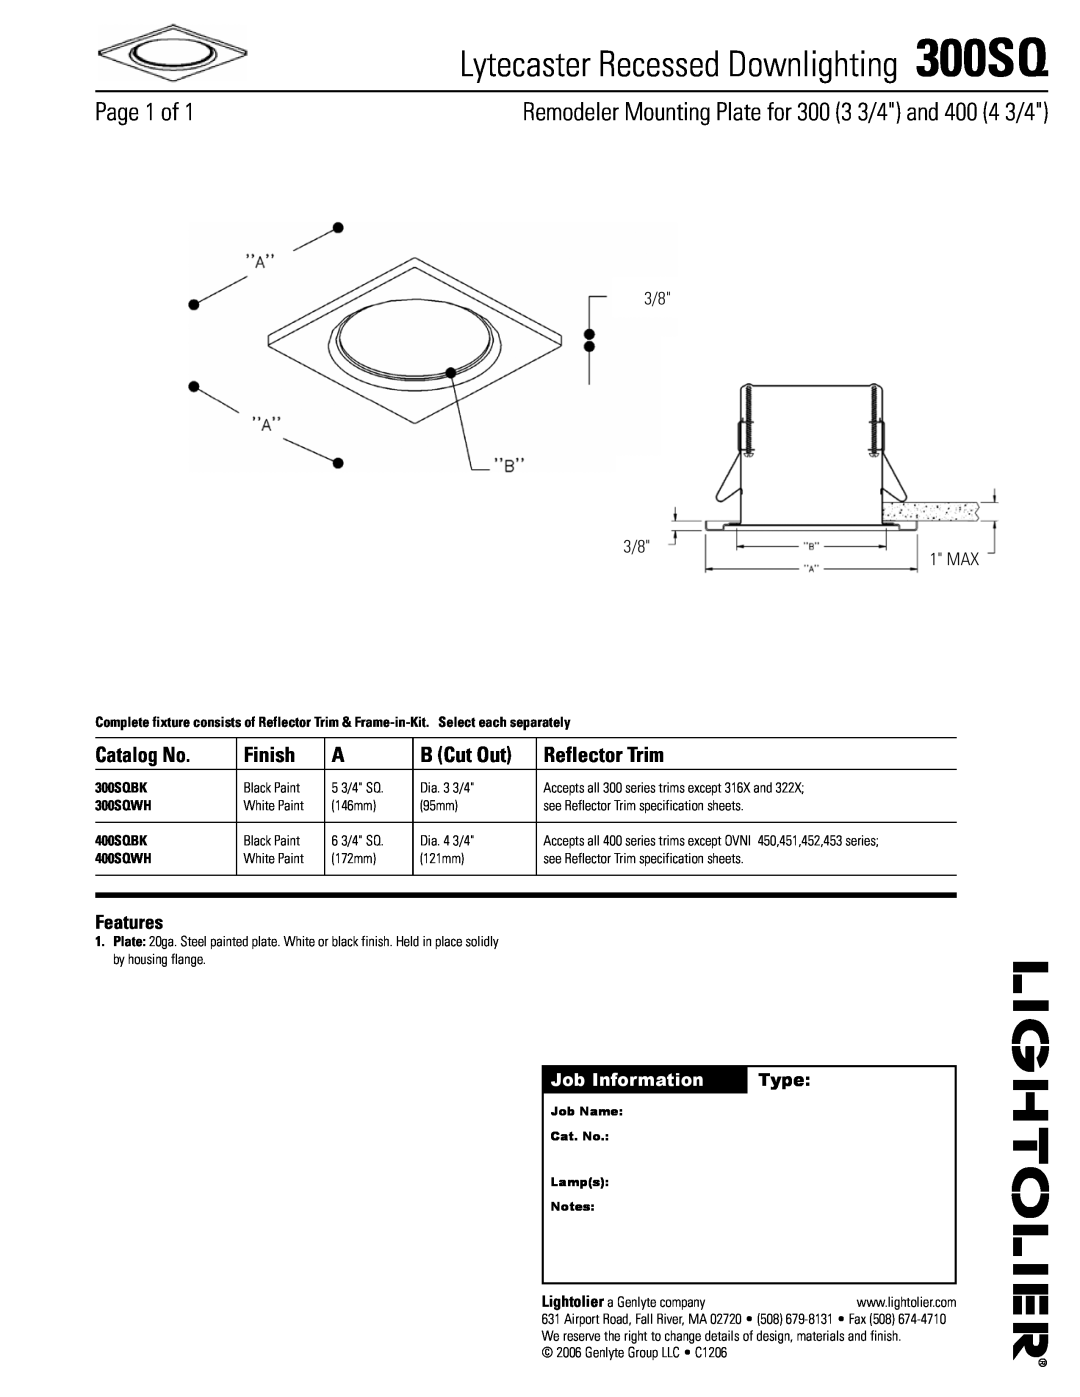 Lightolier specifications Lytecaster Recessed Downlighting 300SQ, Page of, Catalog No, Finish, B Cut Out, Features 